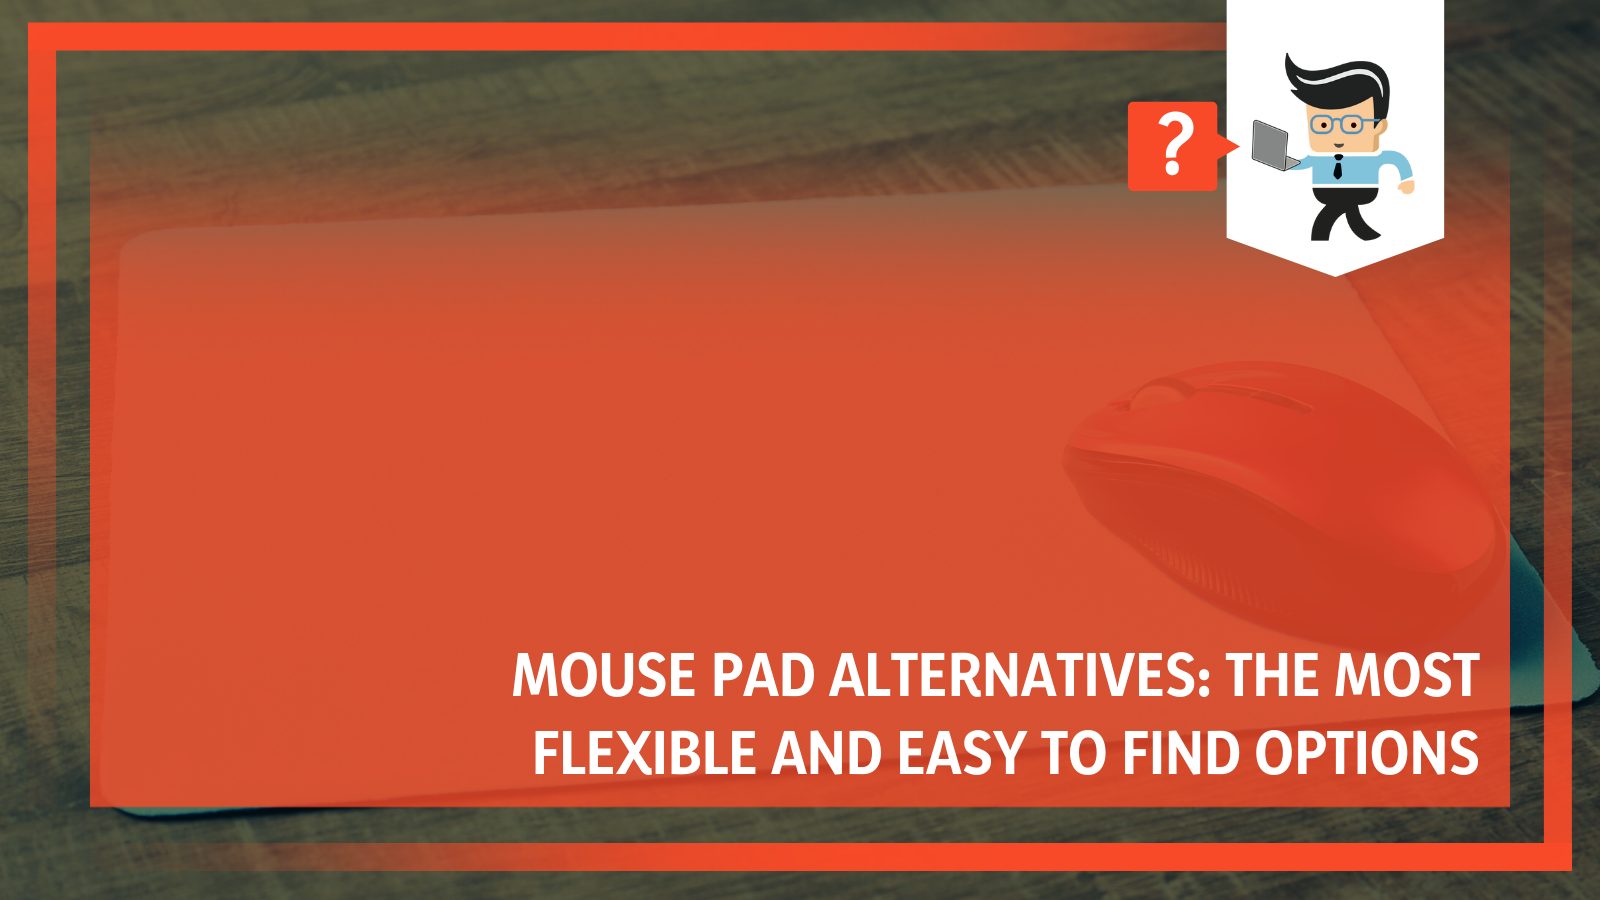 What can i use as a mousepad